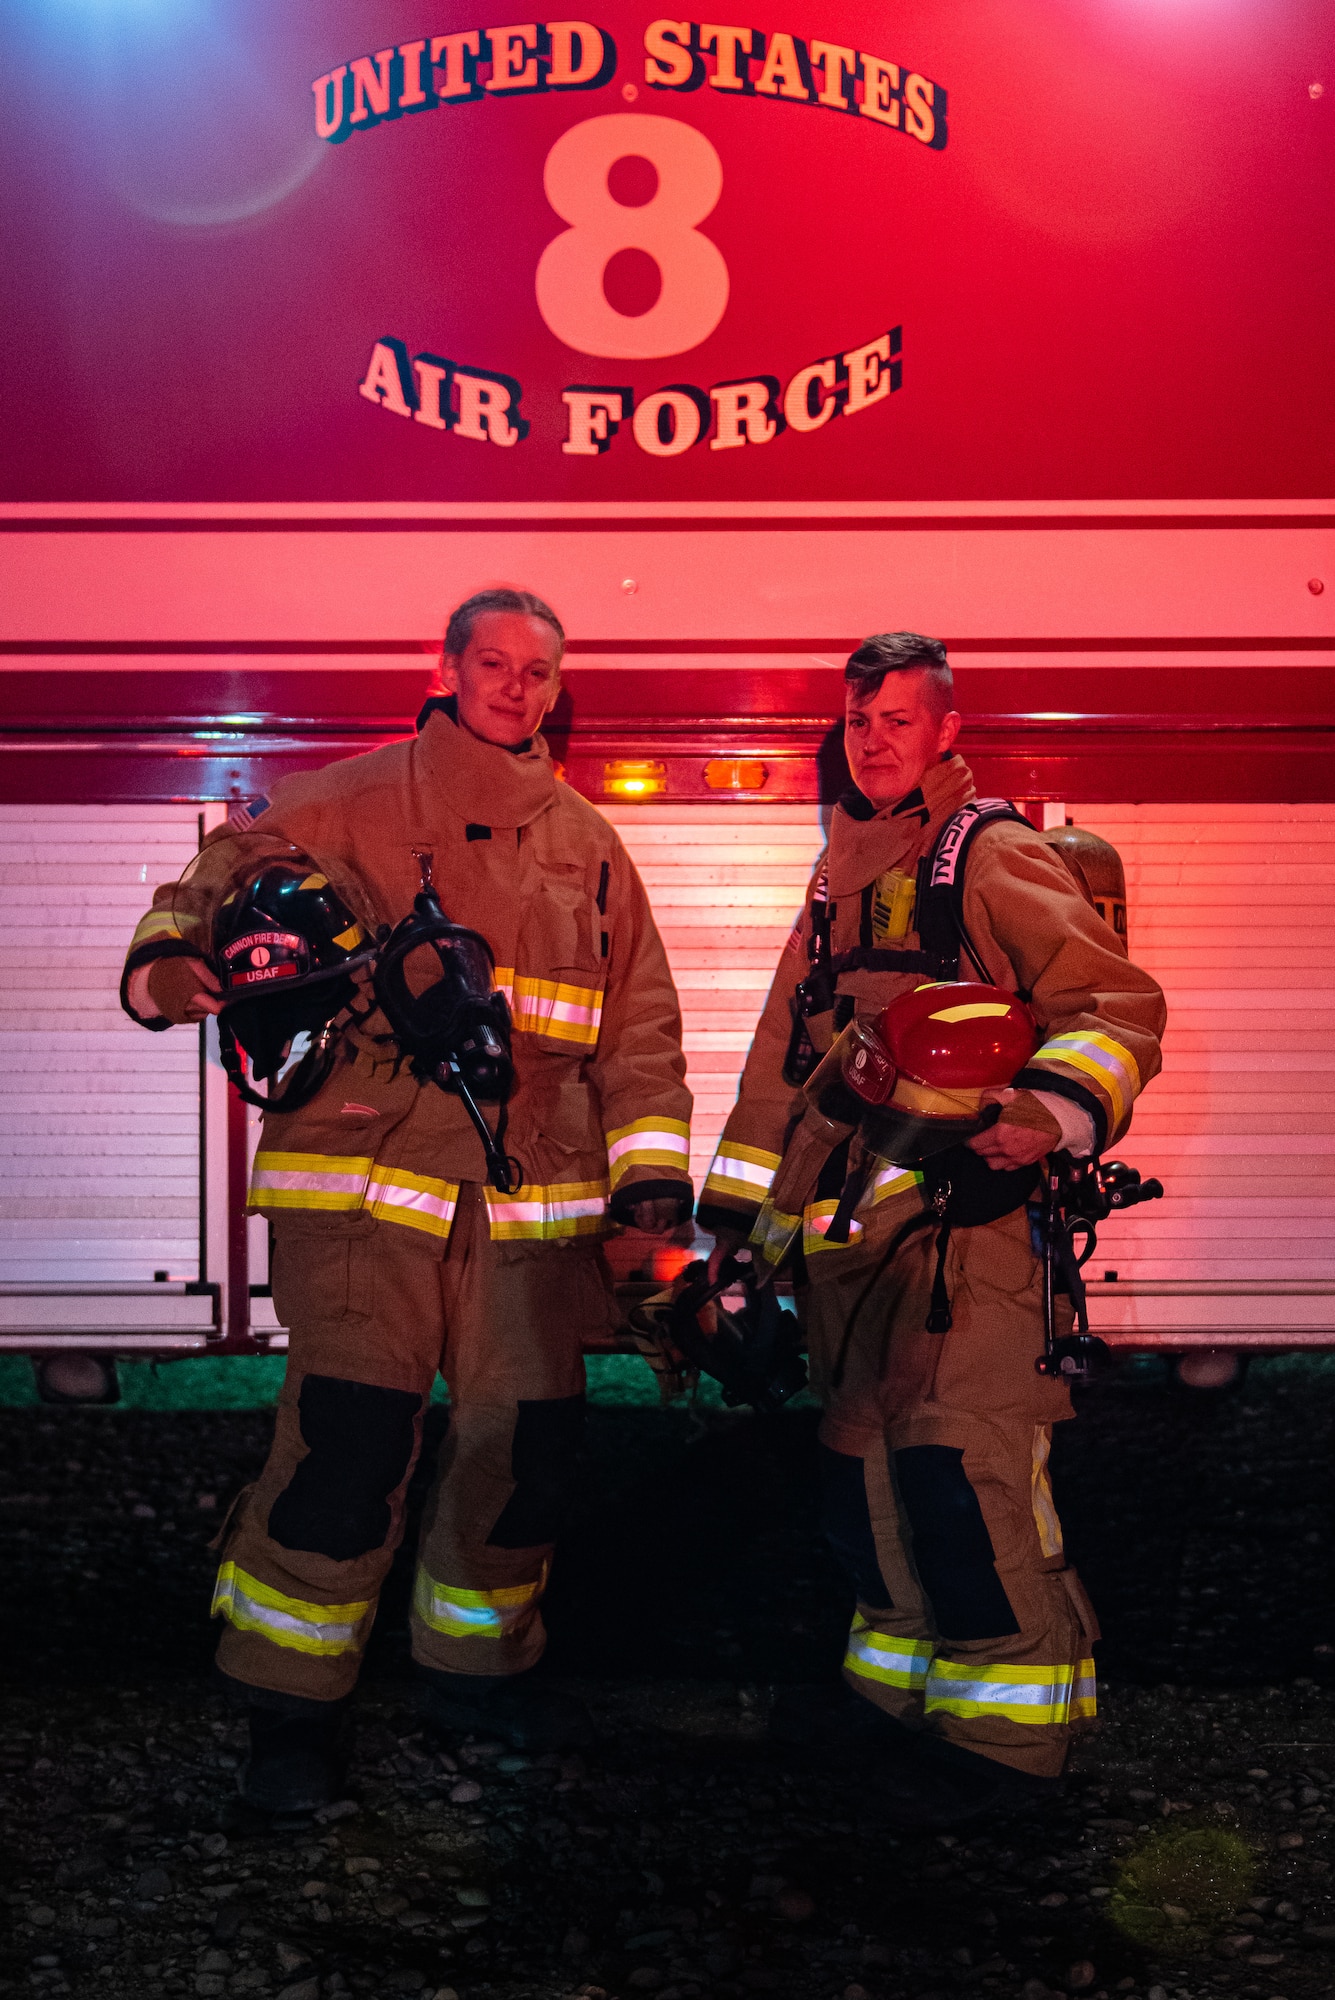 Two firefighters posed for a portrait on the side of their fire truck.